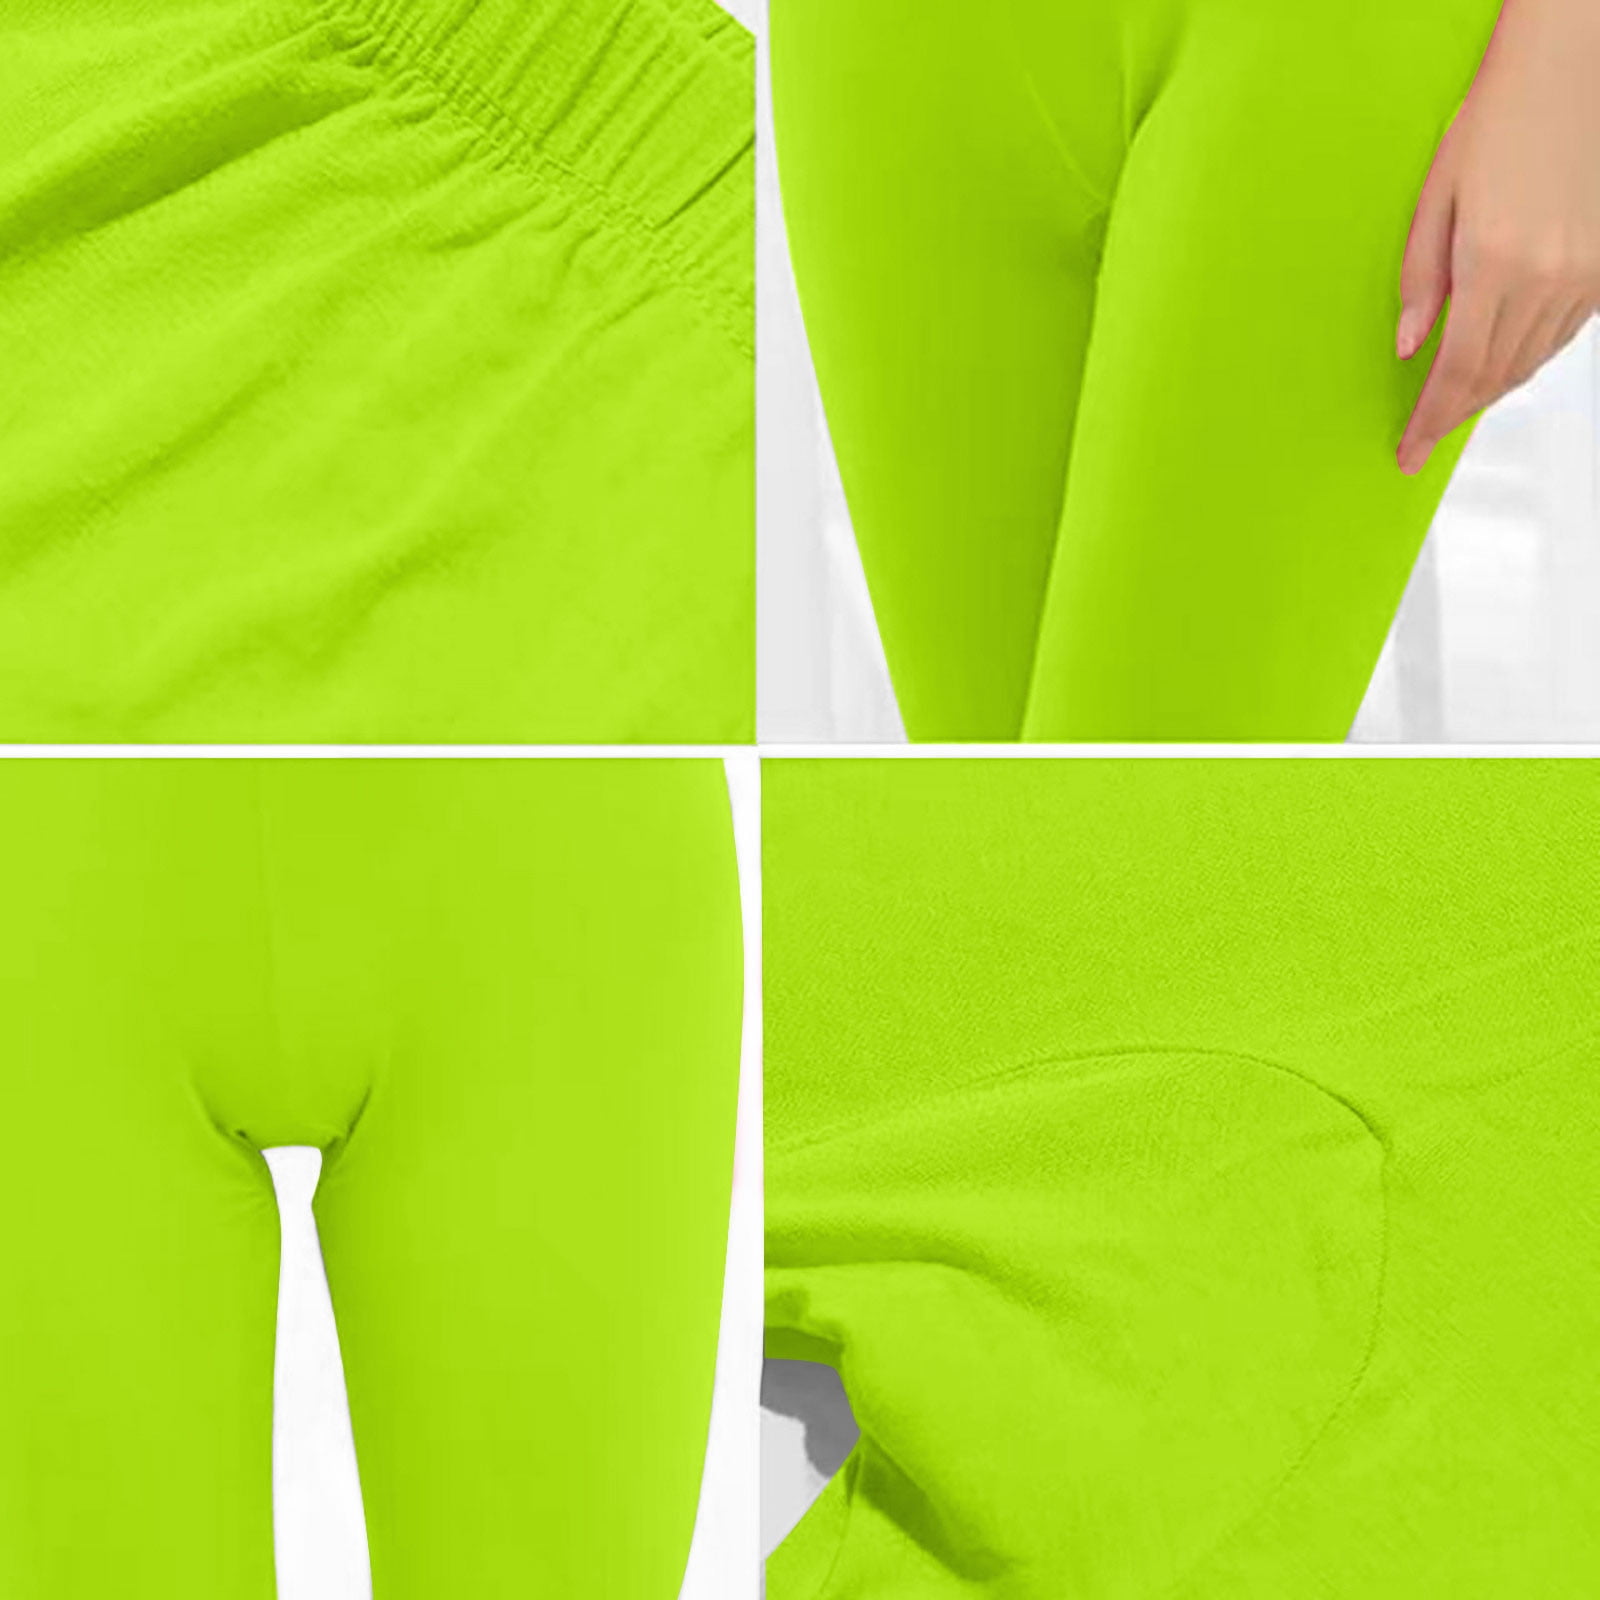 RYDCOT Womens High Waist Running Workout Yoga Leggings Sports Fitness Pants  Solid Color Casual Tight Fitting Yoga Pants Stretch Pants Sale or Clearance  